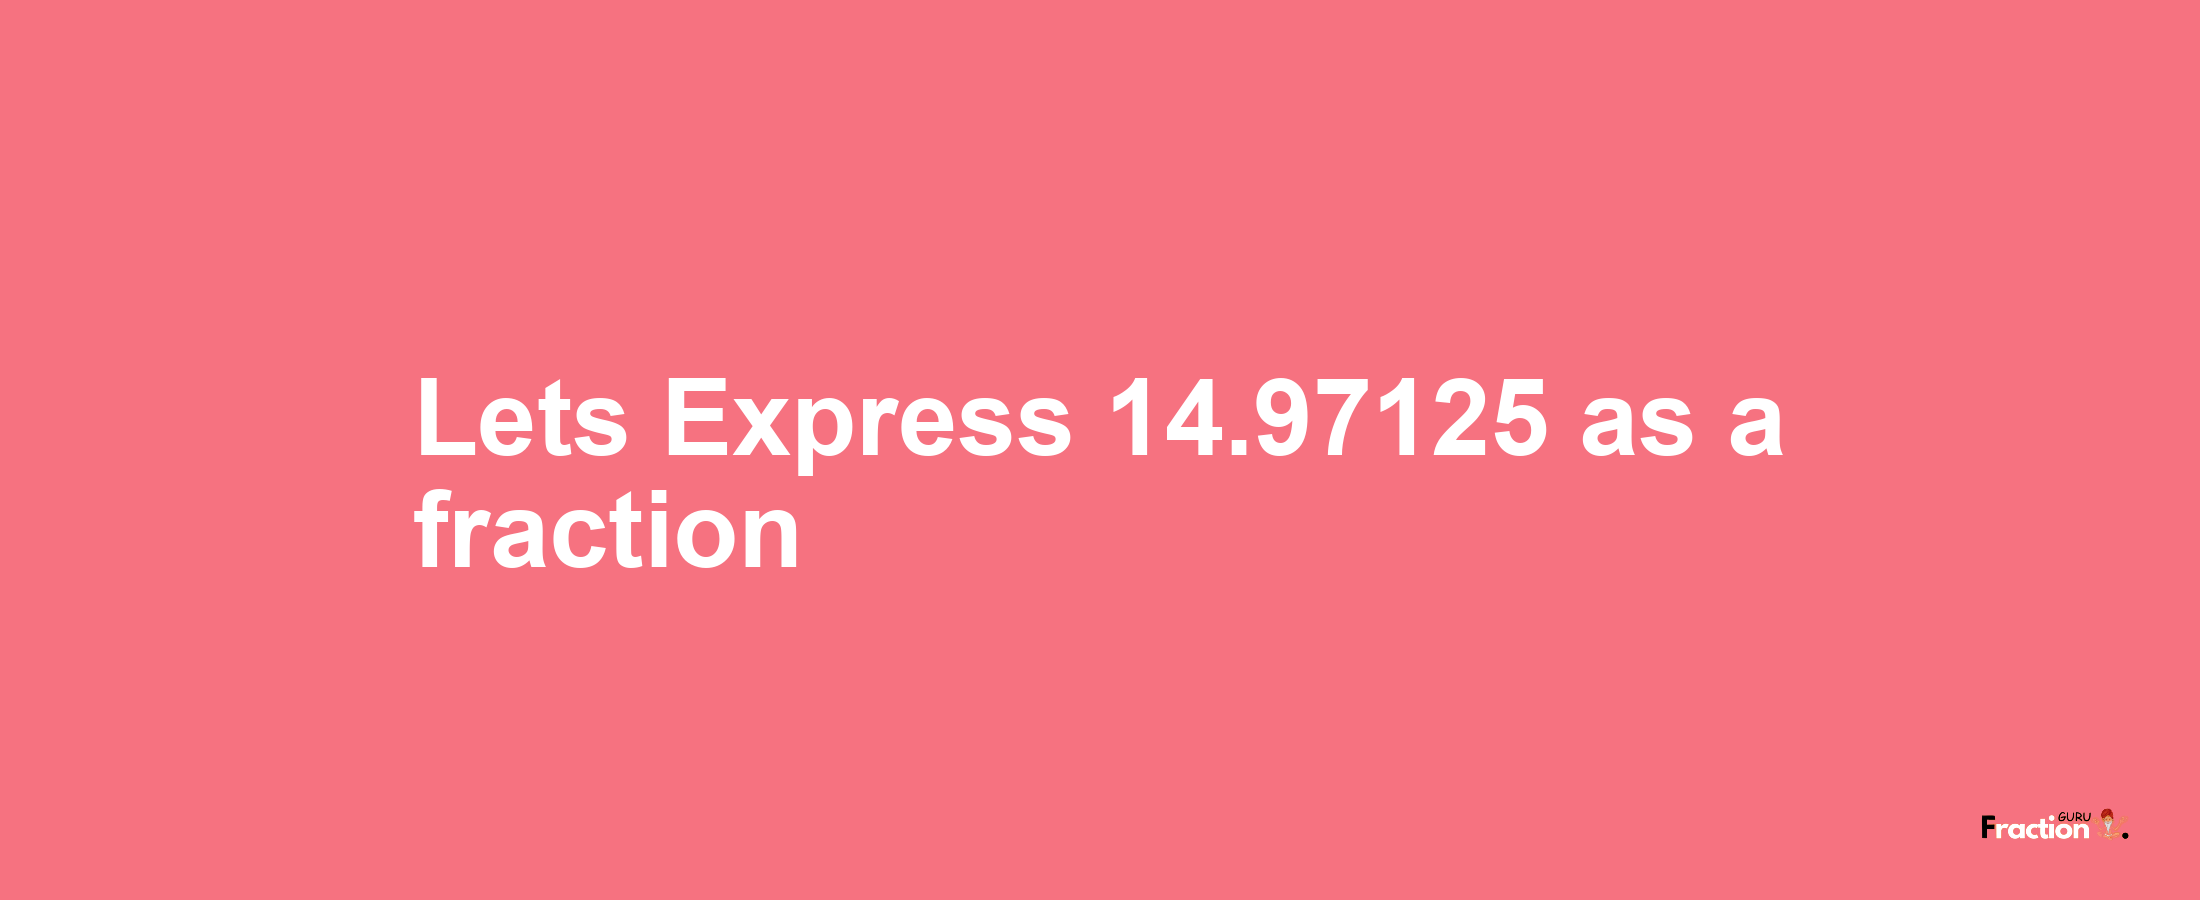 Lets Express 14.97125 as afraction